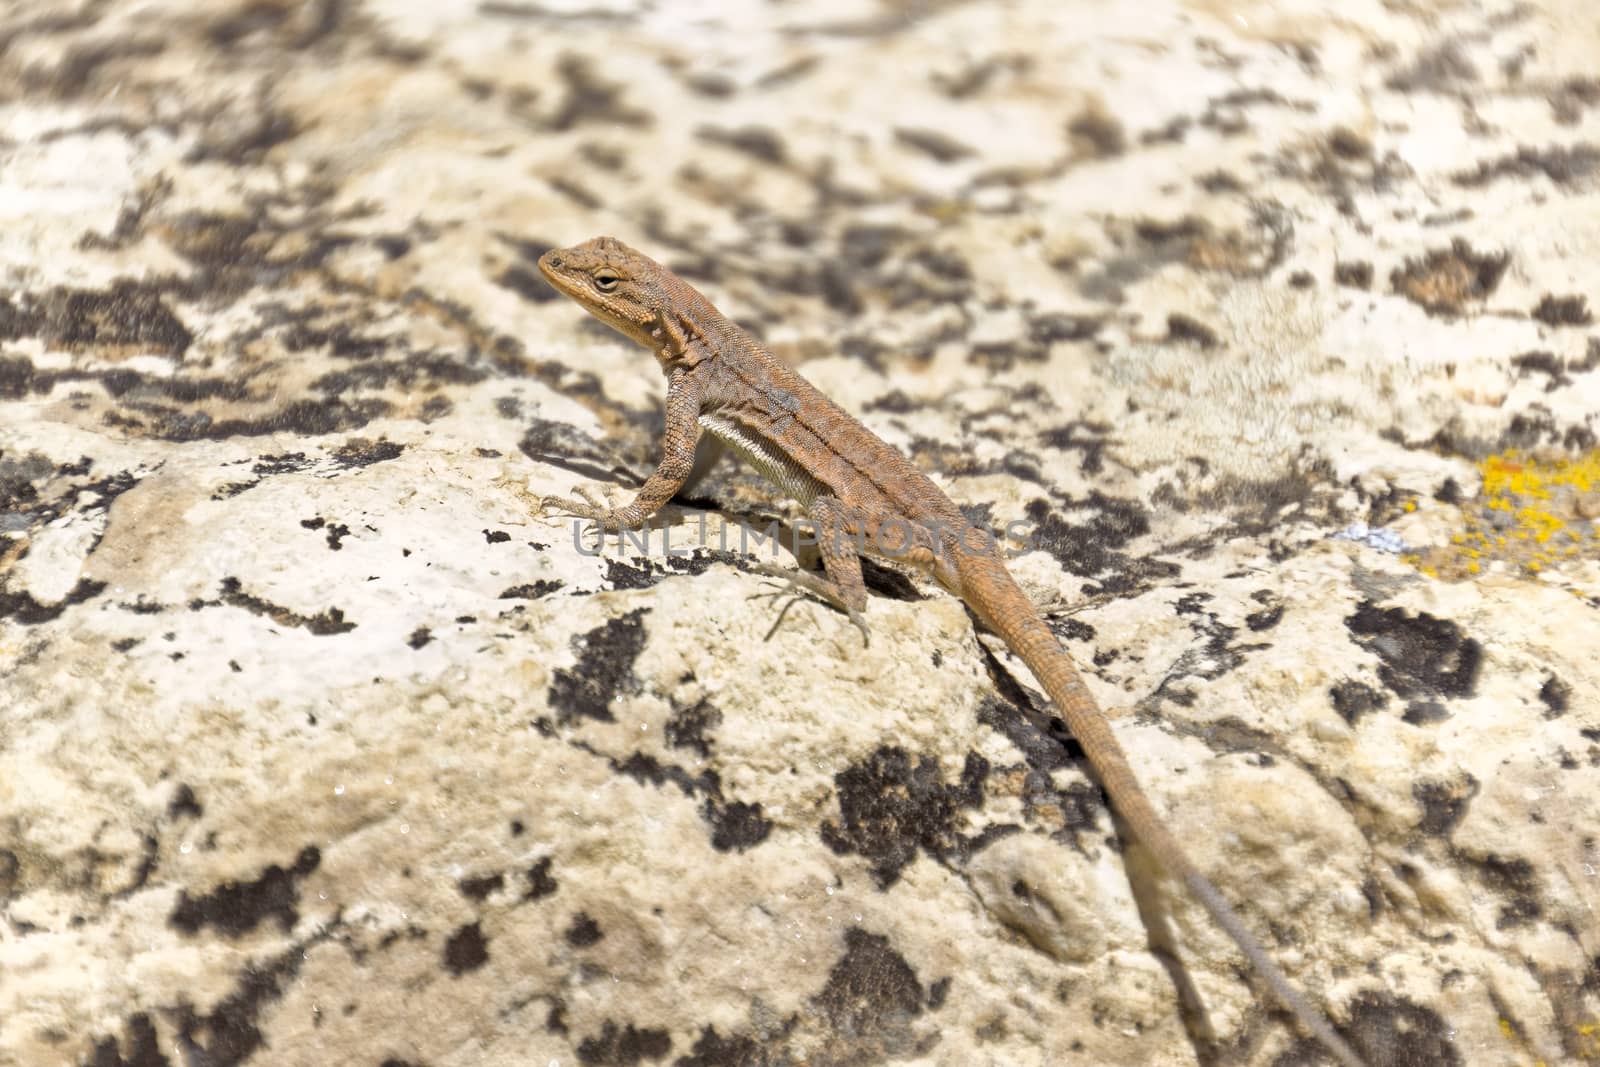 Cape Royal Lizard by bkenney5@gmail.com